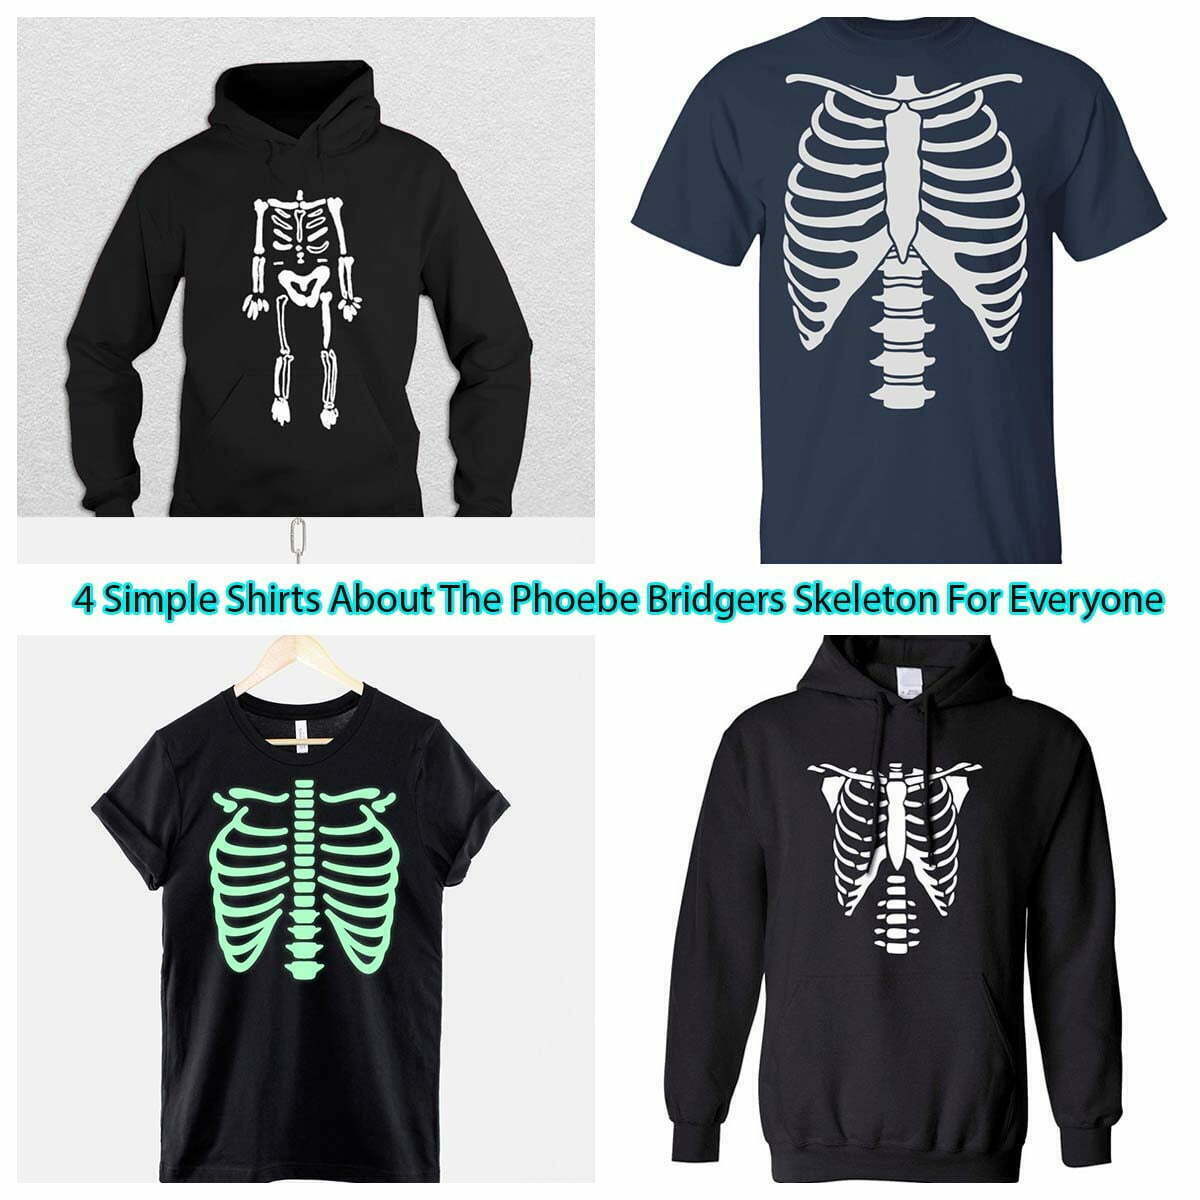 4 Simple Shirts About The Phoebe Bridgers Skeleton For Everyone